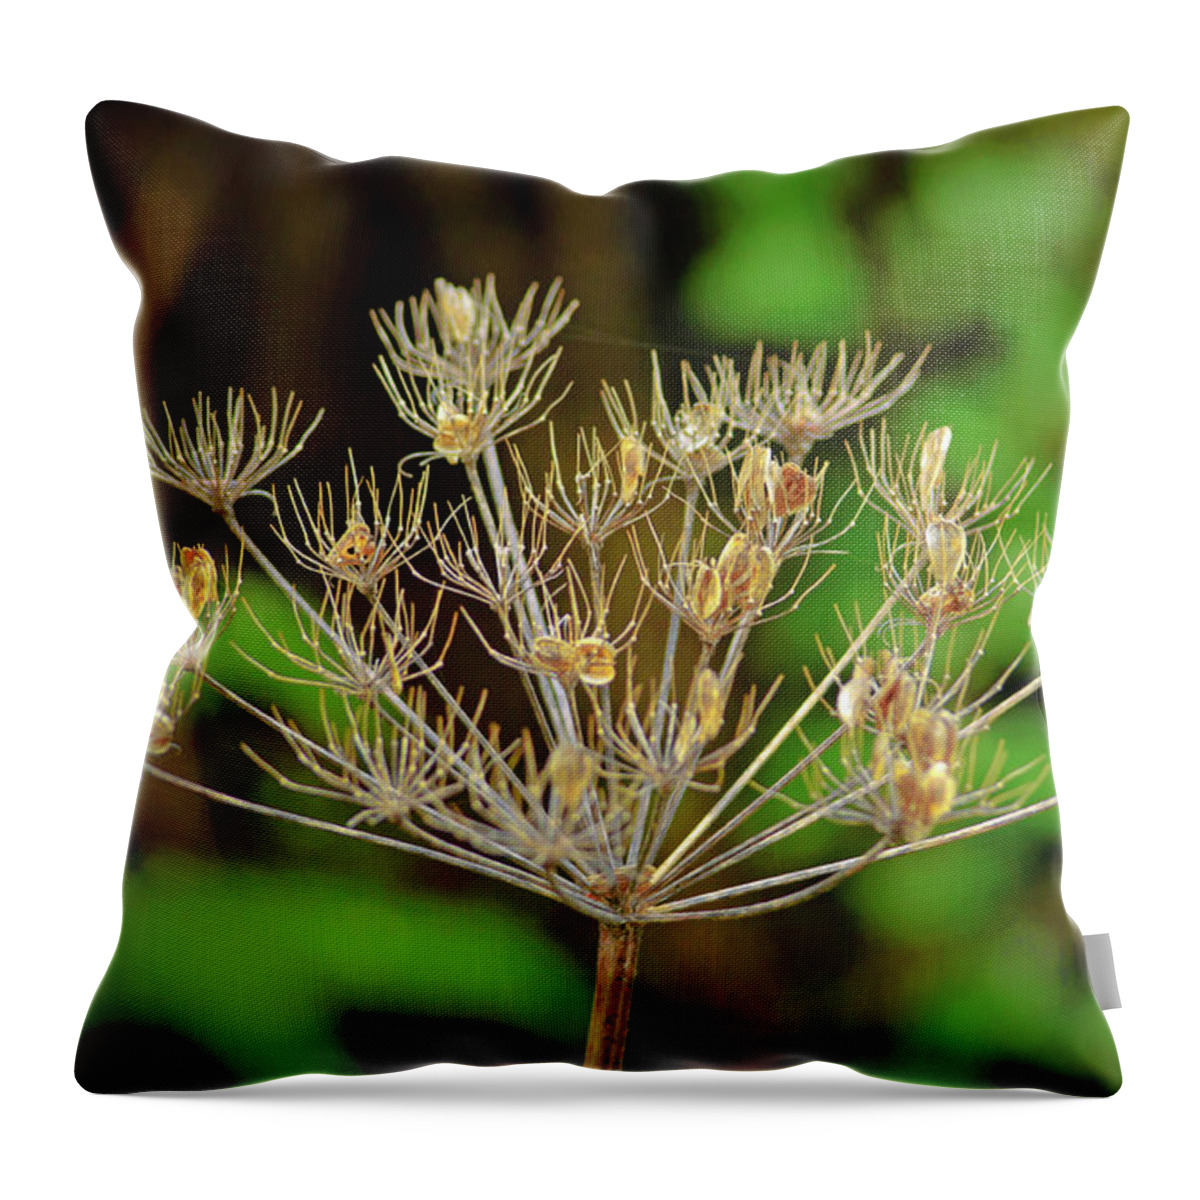 Plant Throw Pillow featuring the photograph Dead Hemlock Flower and Seeds by Tikvah's Hope